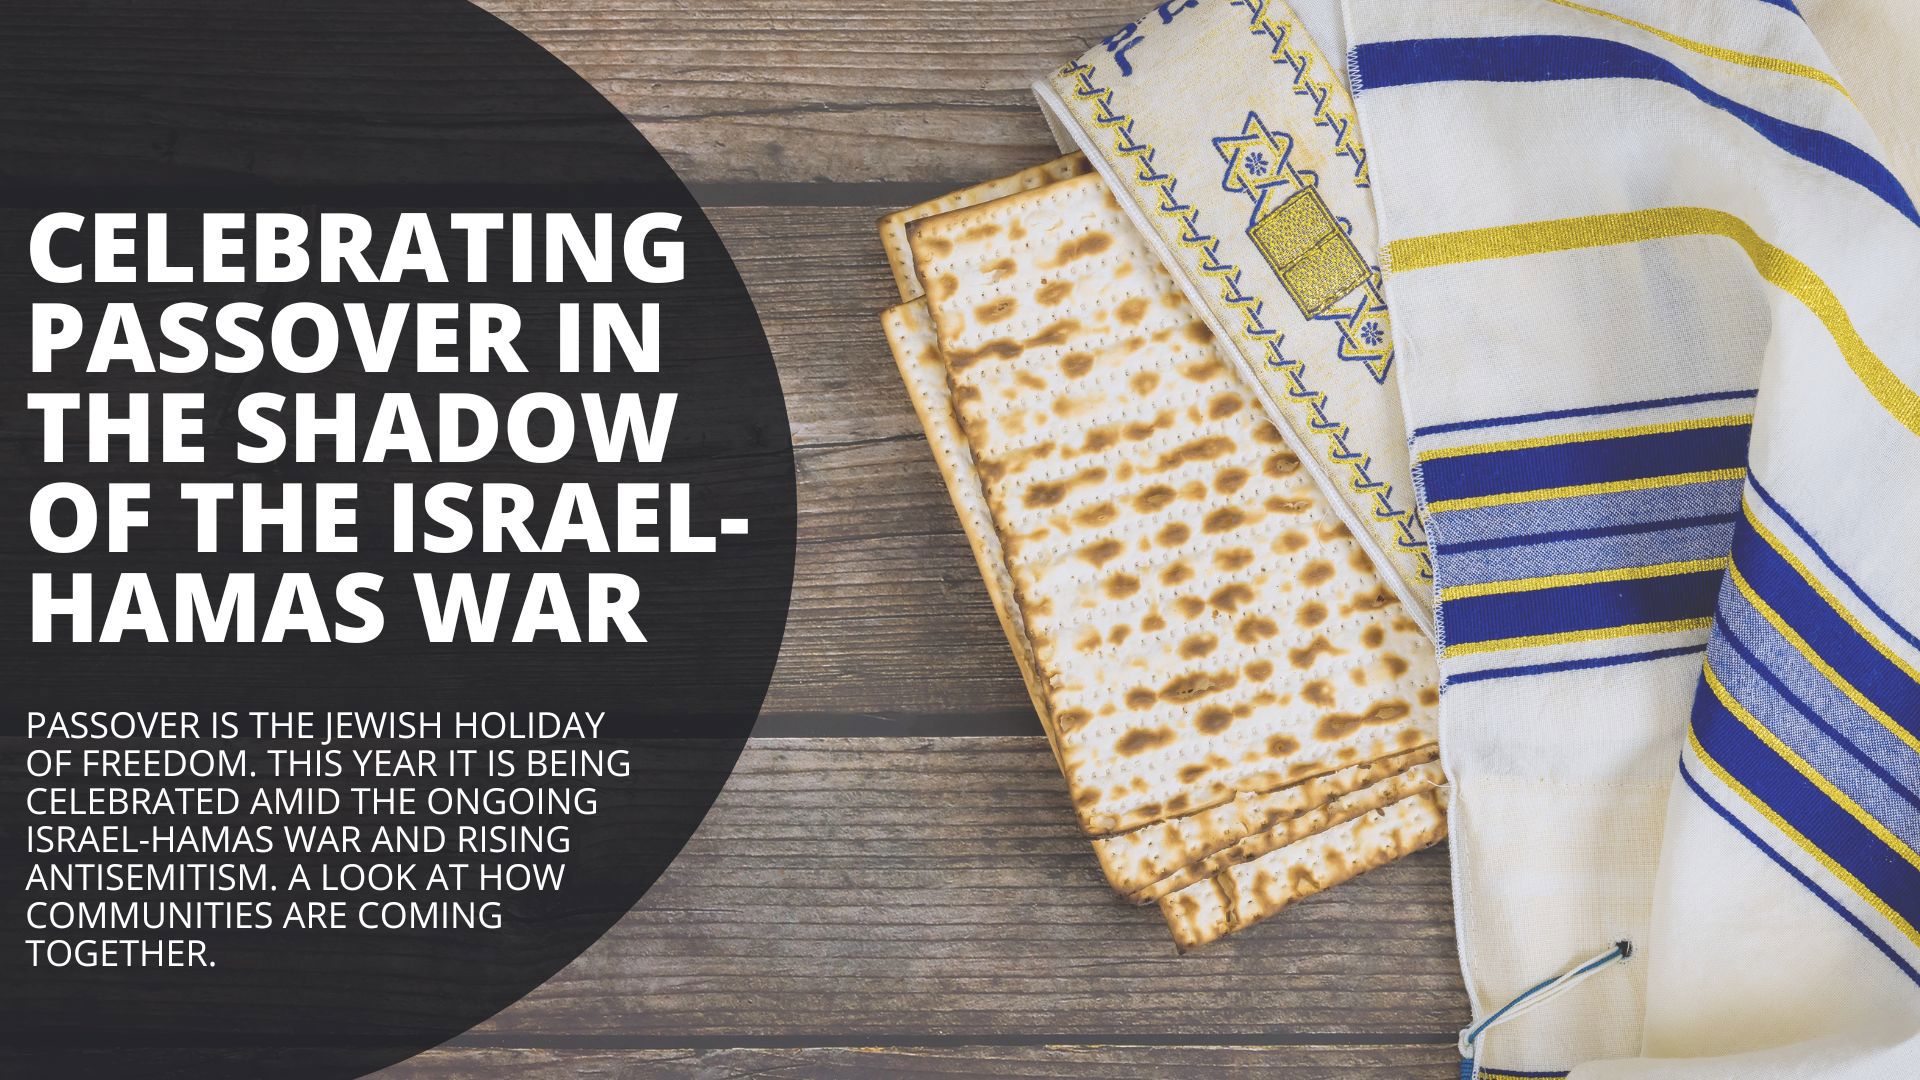 Passover is the Jewish holiday of freedom. It is being celebrated amid the Israel-Hamas war and rising antisemitism. See how communities are coming together.